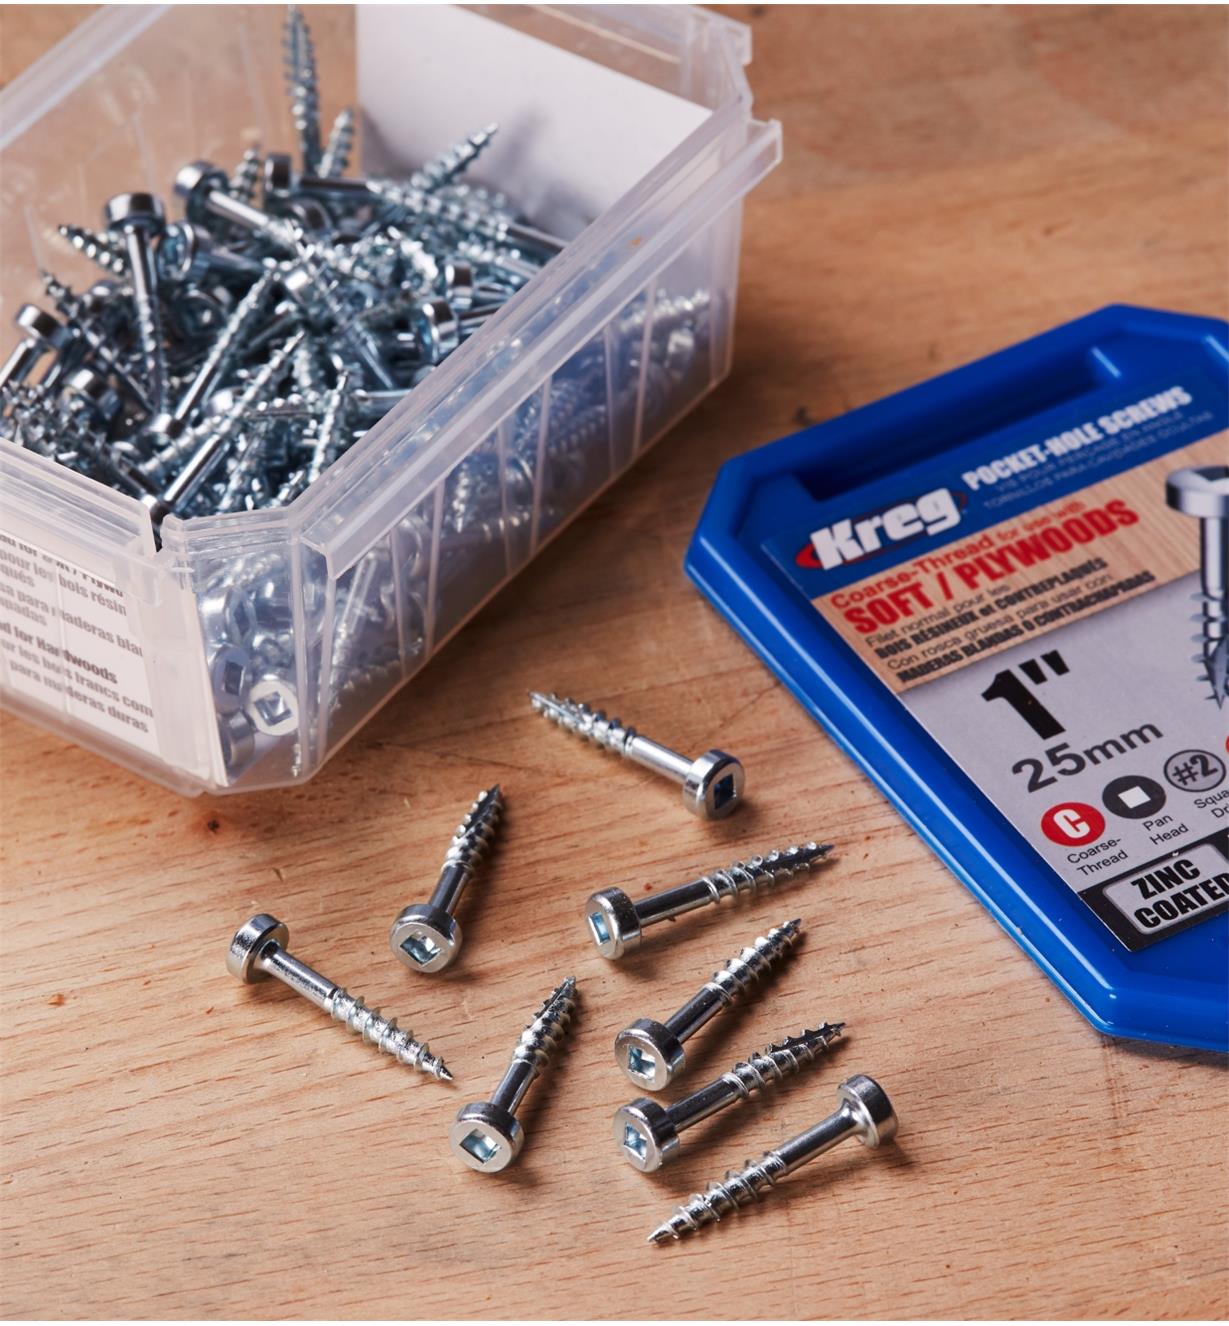 An open box of Kreg Pocket Screws with a few screws displayed on a wood surface